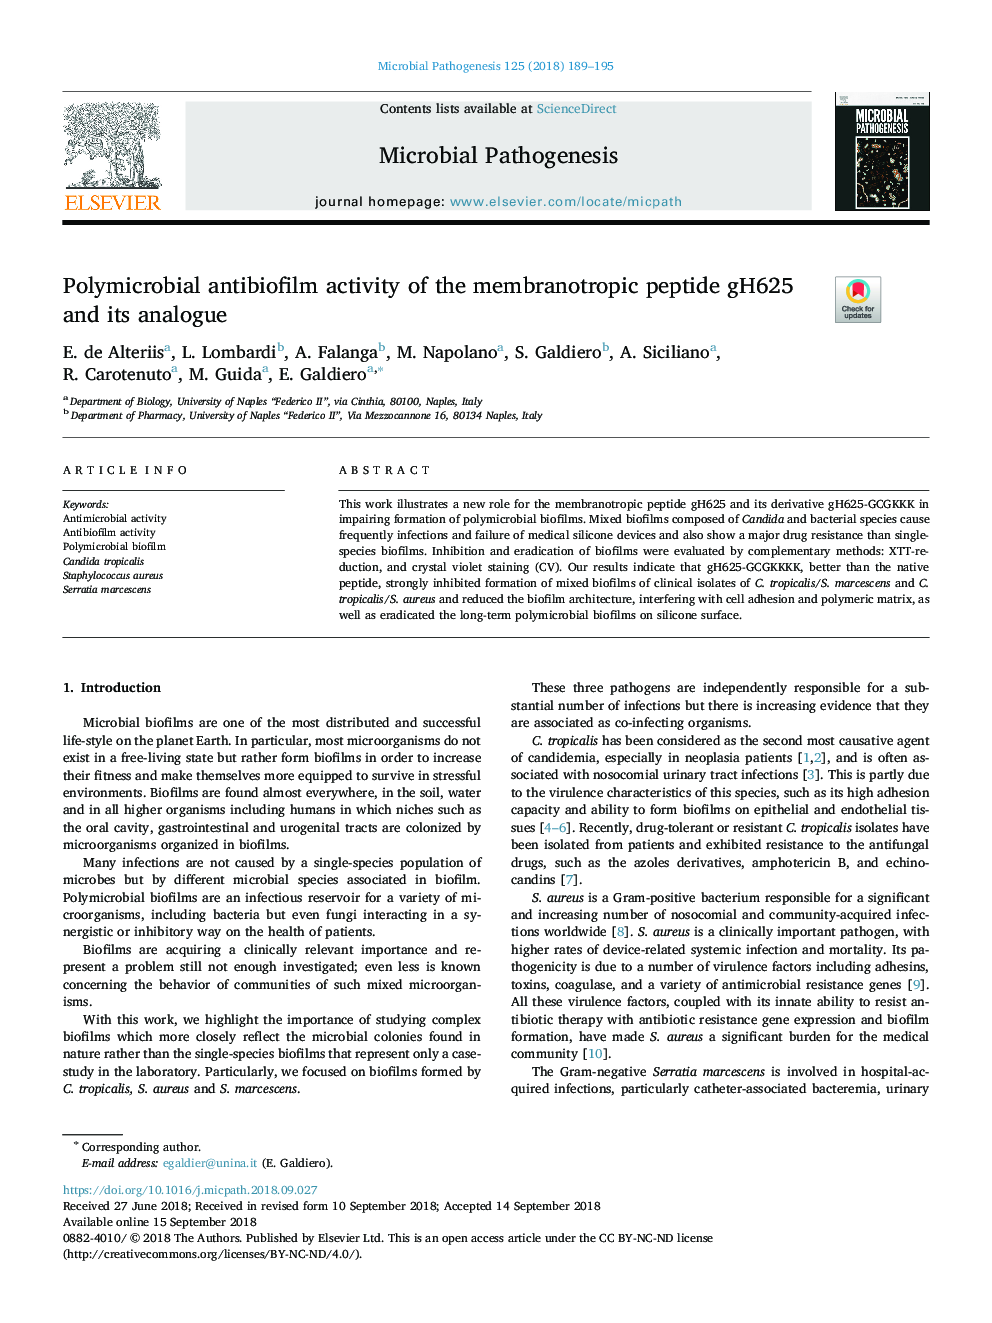 Polymicrobial antibiofilm activity of the membranotropic peptide gH625 and its analogue